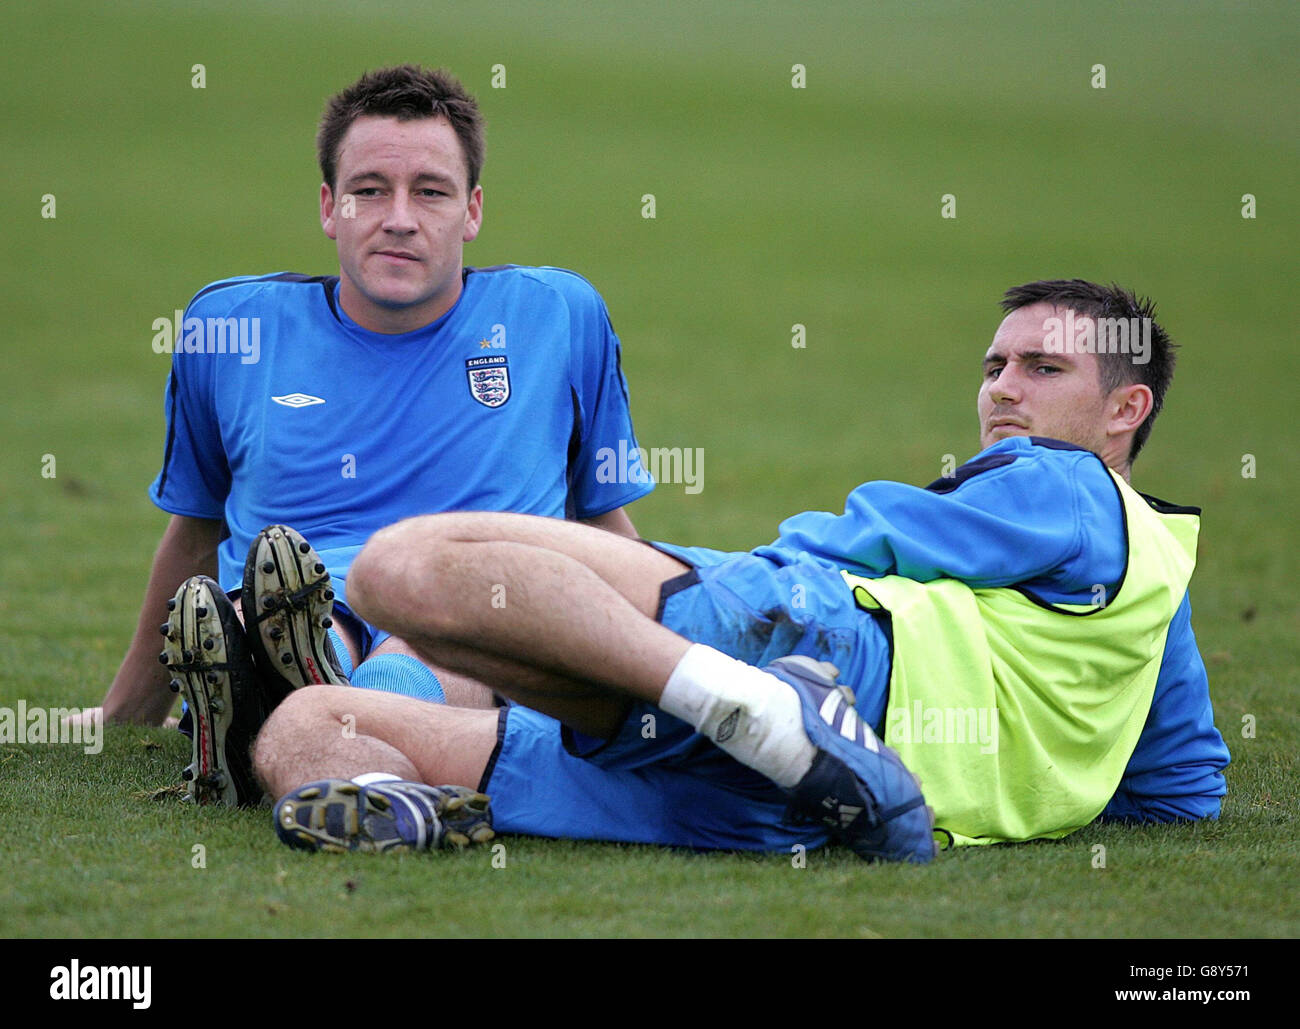 England and Chelsea team-mates John Terry (L) and Frank Lampard take a break during a training session at Carrington Training Ground, Manchester, Tuesday October 4, 2005. England play Austria in their World Cup qualifying match on Saturday. PRESS ASSOCIATION Photo. Photo credit should read: Martin Rickett/PA. Stock Photo